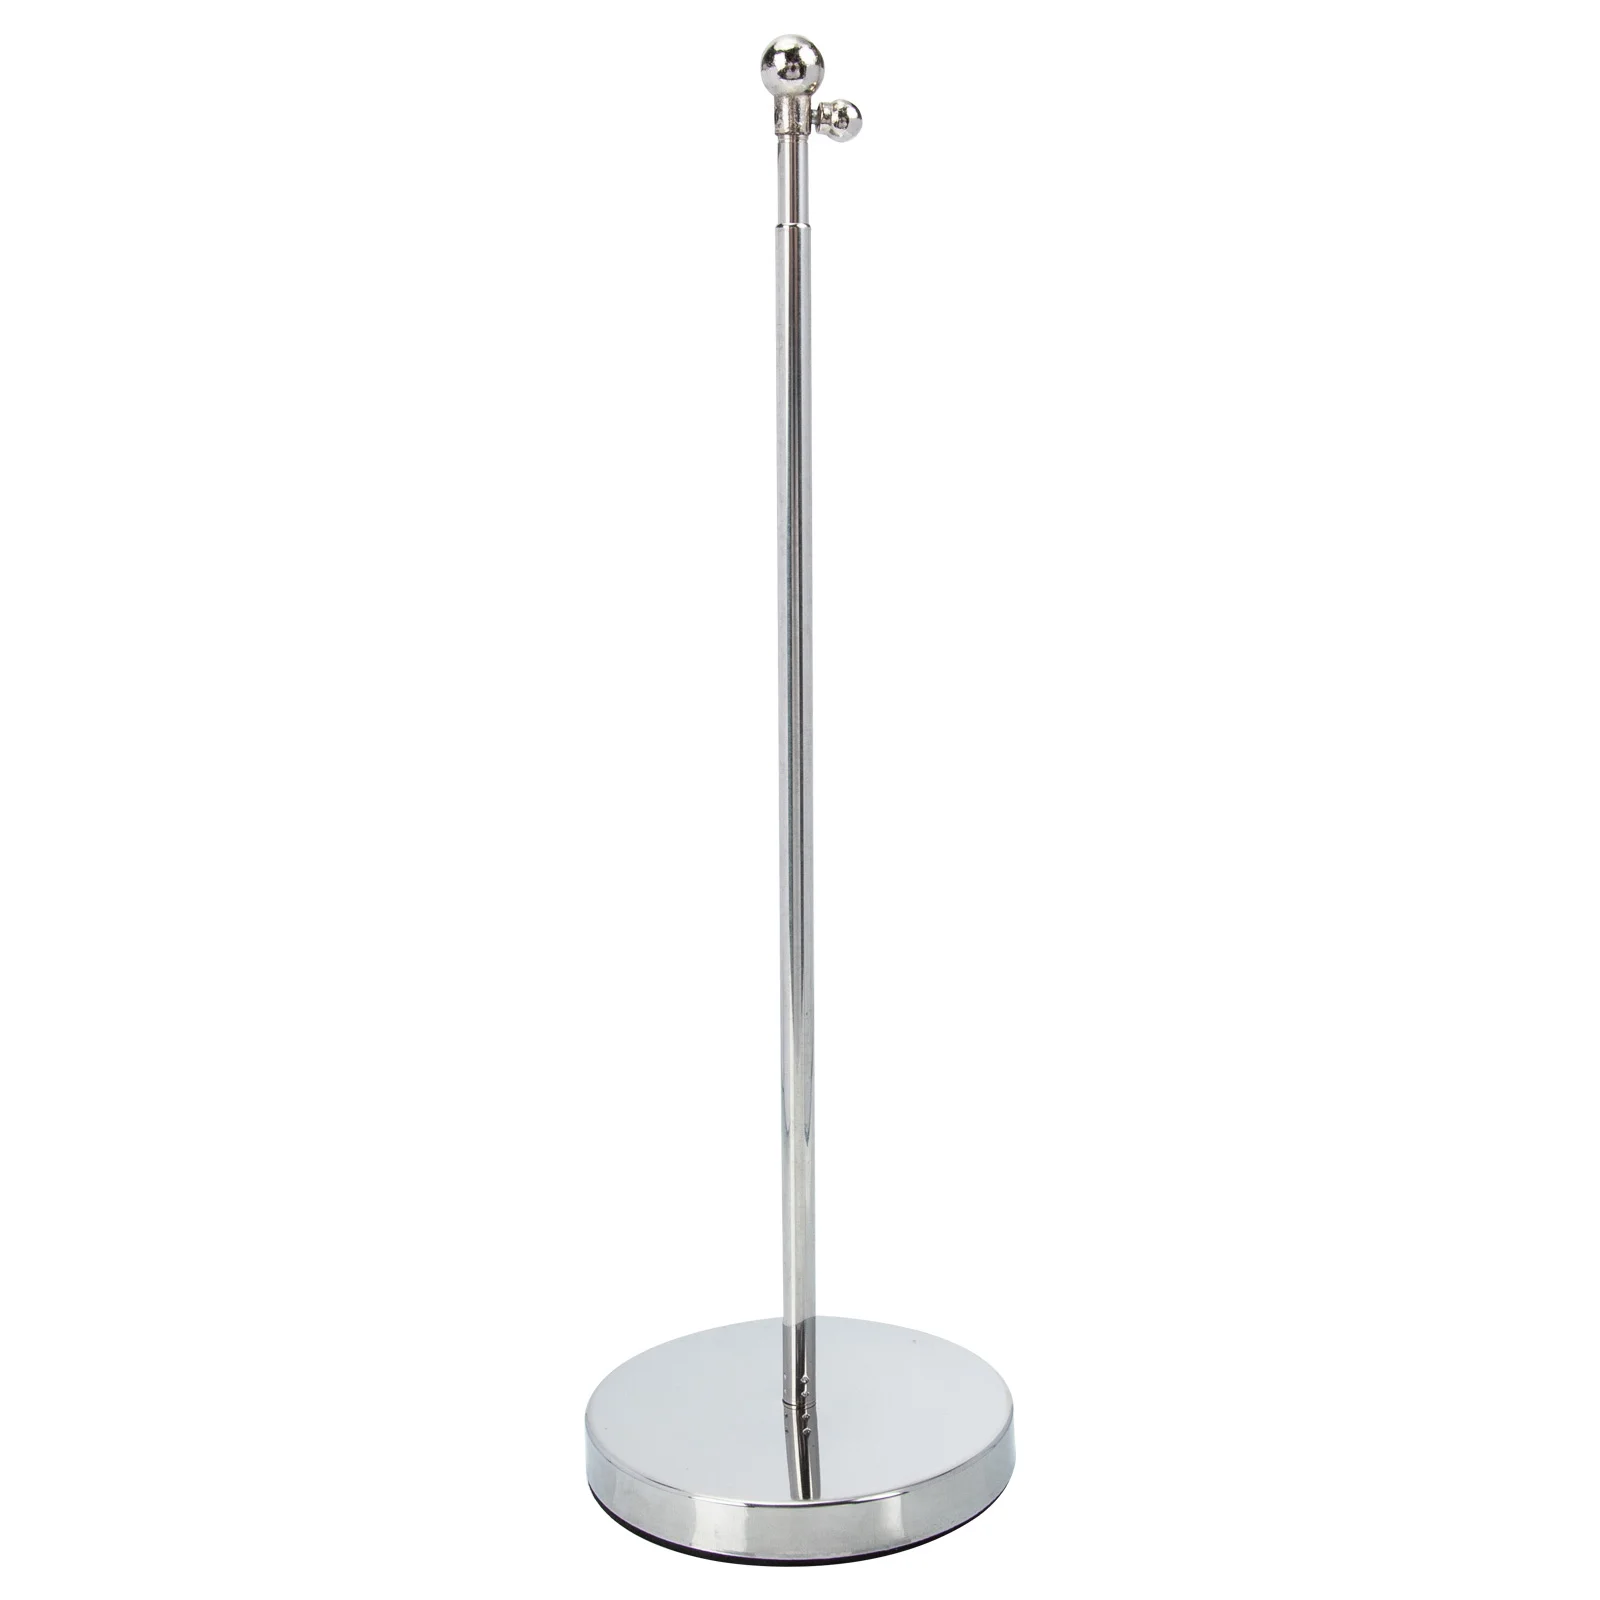 

Flag Pole Stand Holder Table Desk Base Flags Mini Holders Desktop Flagpole Indoor Telescopic Stands Office Tabletop Stick